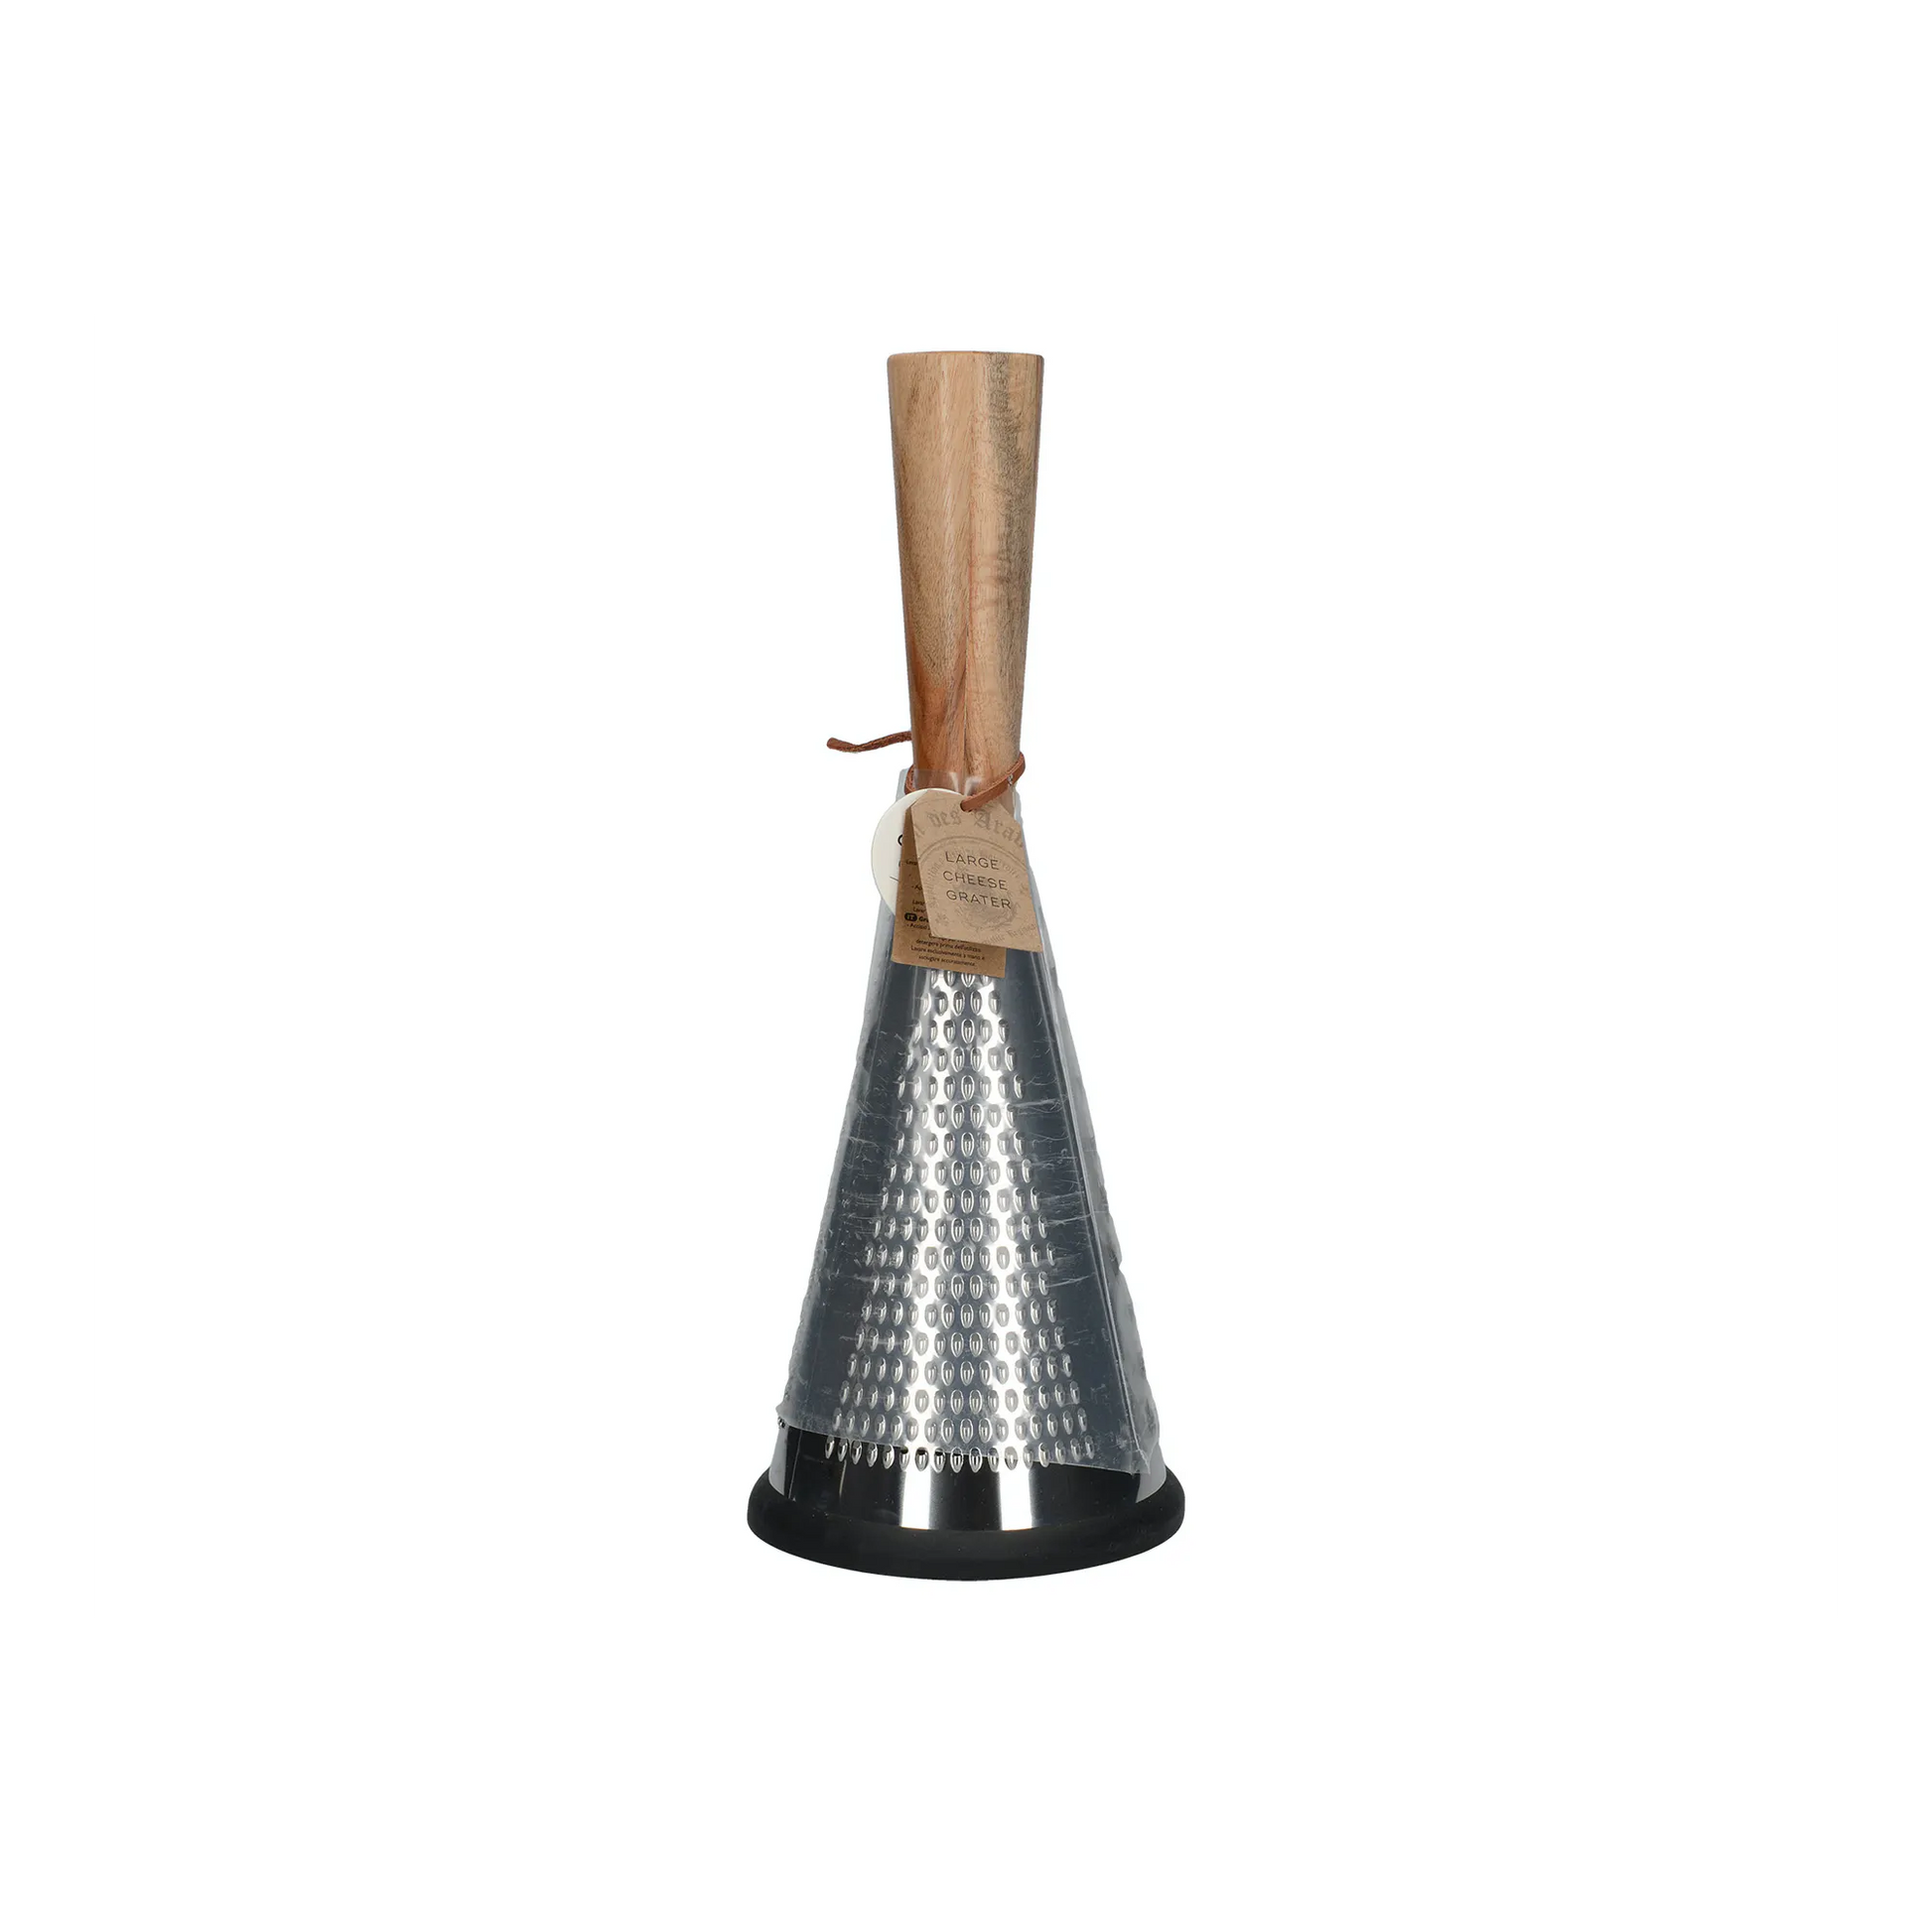 Artesa Cheese Grater with wooden Handle - Large